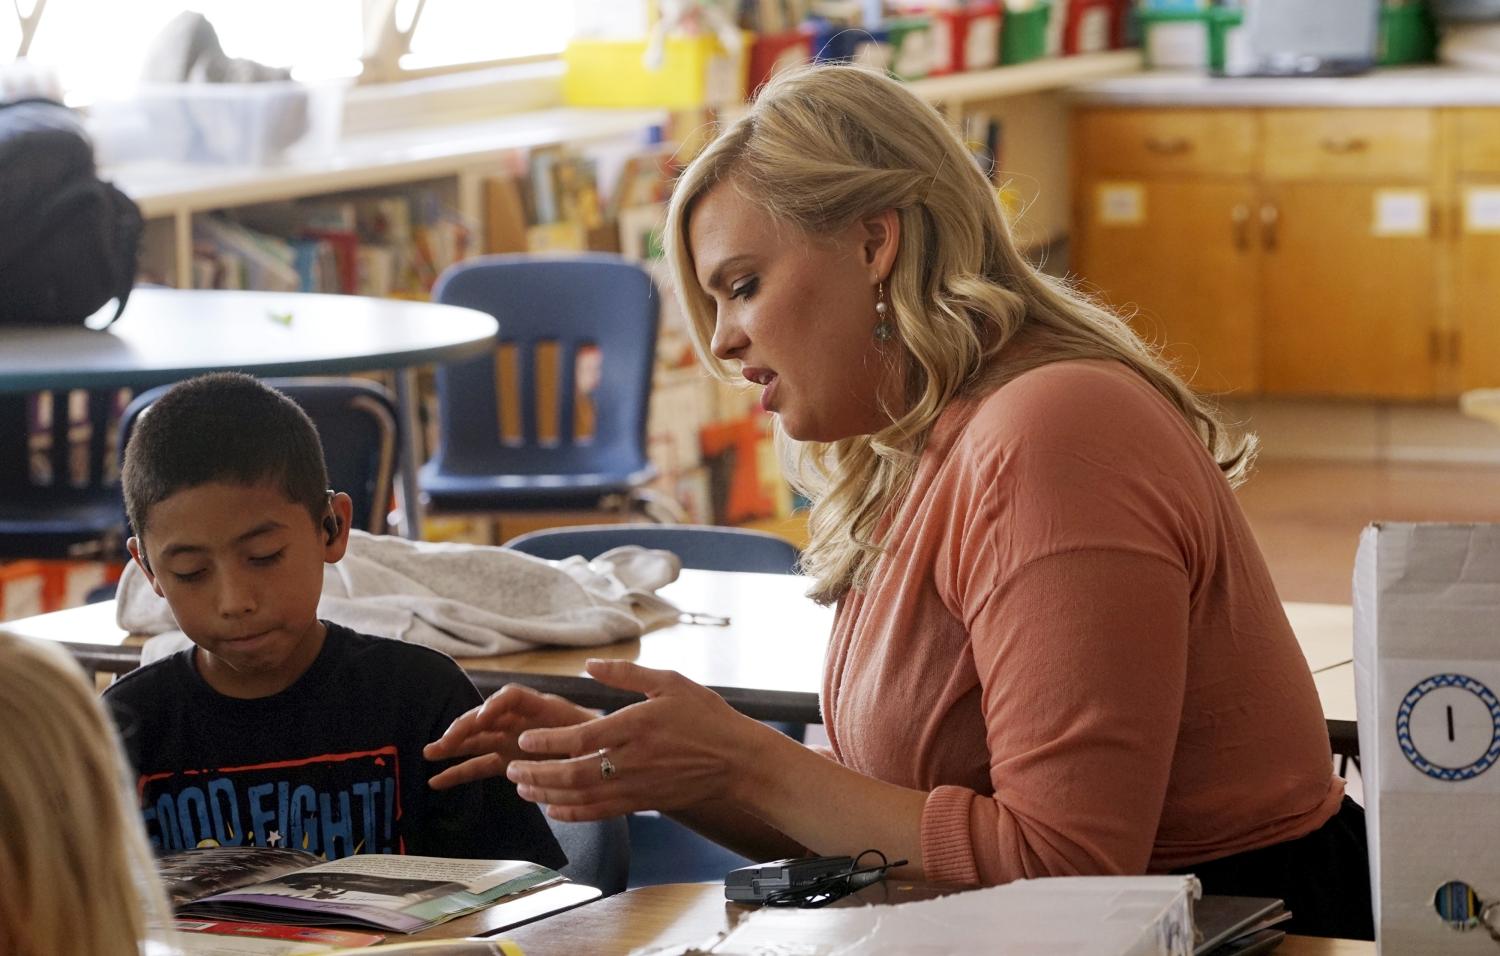 Kyle Schwartz (R), a 3rd grade teacher, works with student Chris Flores in her classroom at Doull Elementary School in Denver April 17, 2015. Schwartz, who posted notes from her third grade class online and started a social media whirlwind under the hashtag #WishMyTeacherKnew said on Friday the assignment had been a revelation for her.  REUTERS/Rick Wilking